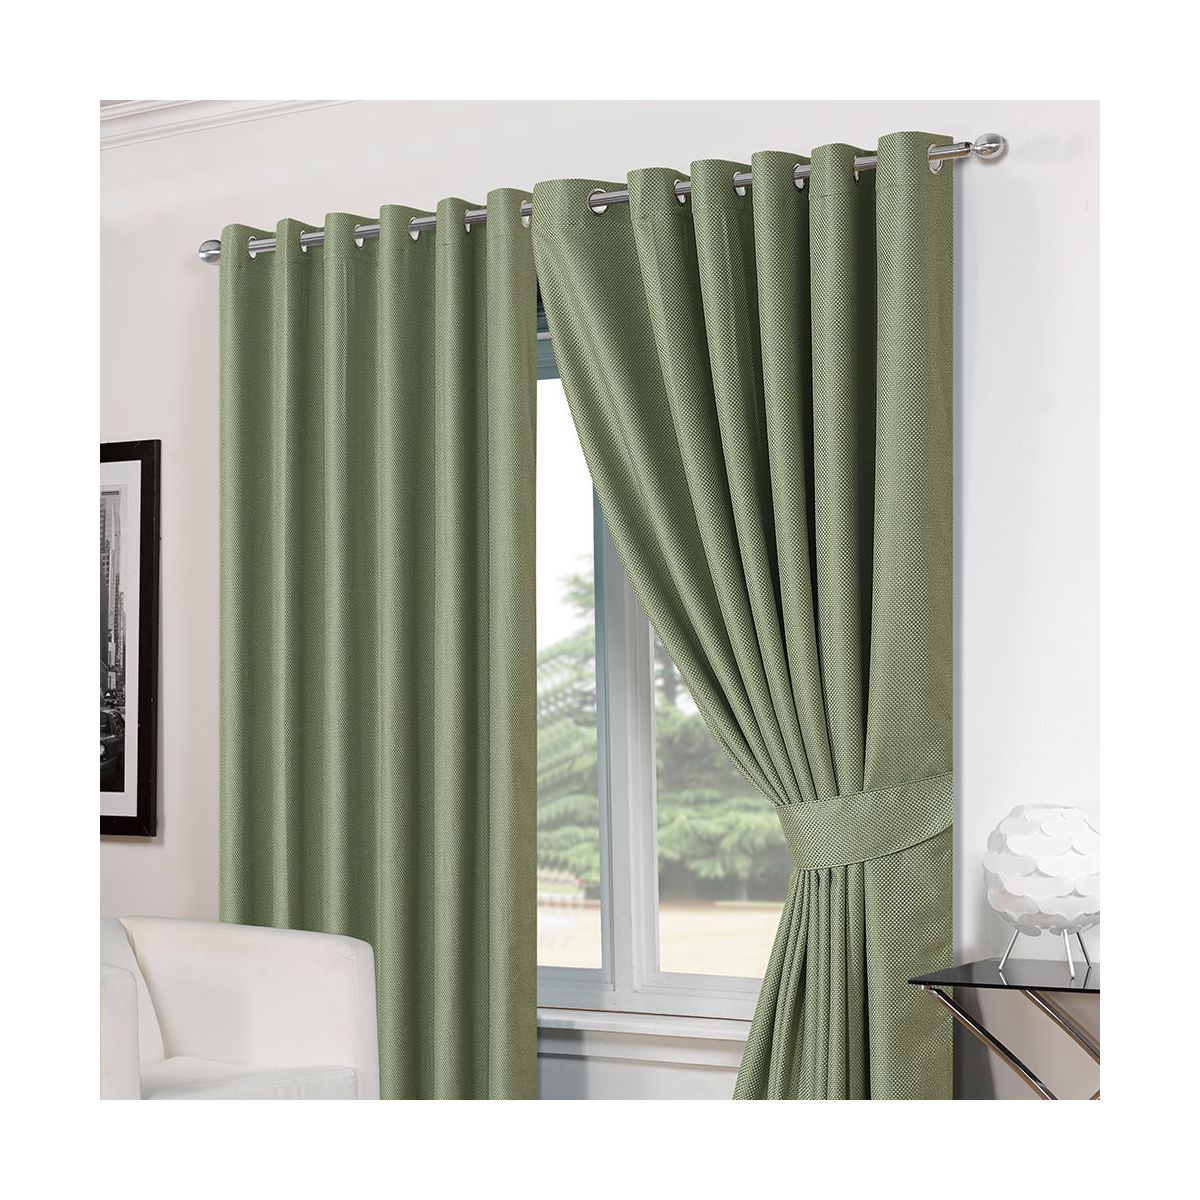 Luxury Basket Weave Lined  Eyelet Curtains with Tiebacks - Soft Green 90"x72"